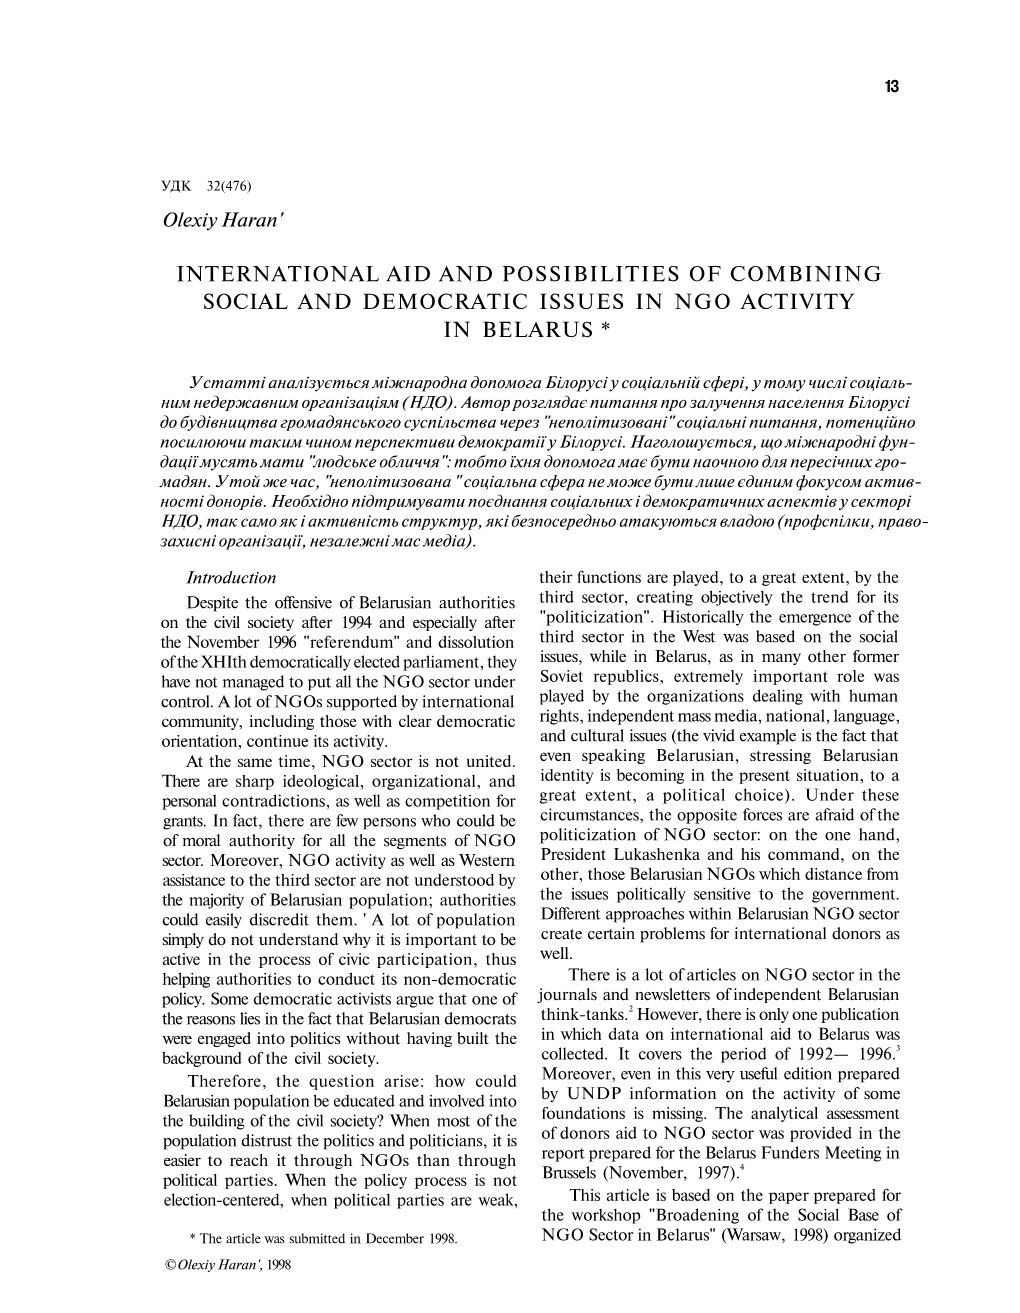 International Aid and Possibilities of Combining Social and Democratic Issues in Ngo Activity in Belarus *